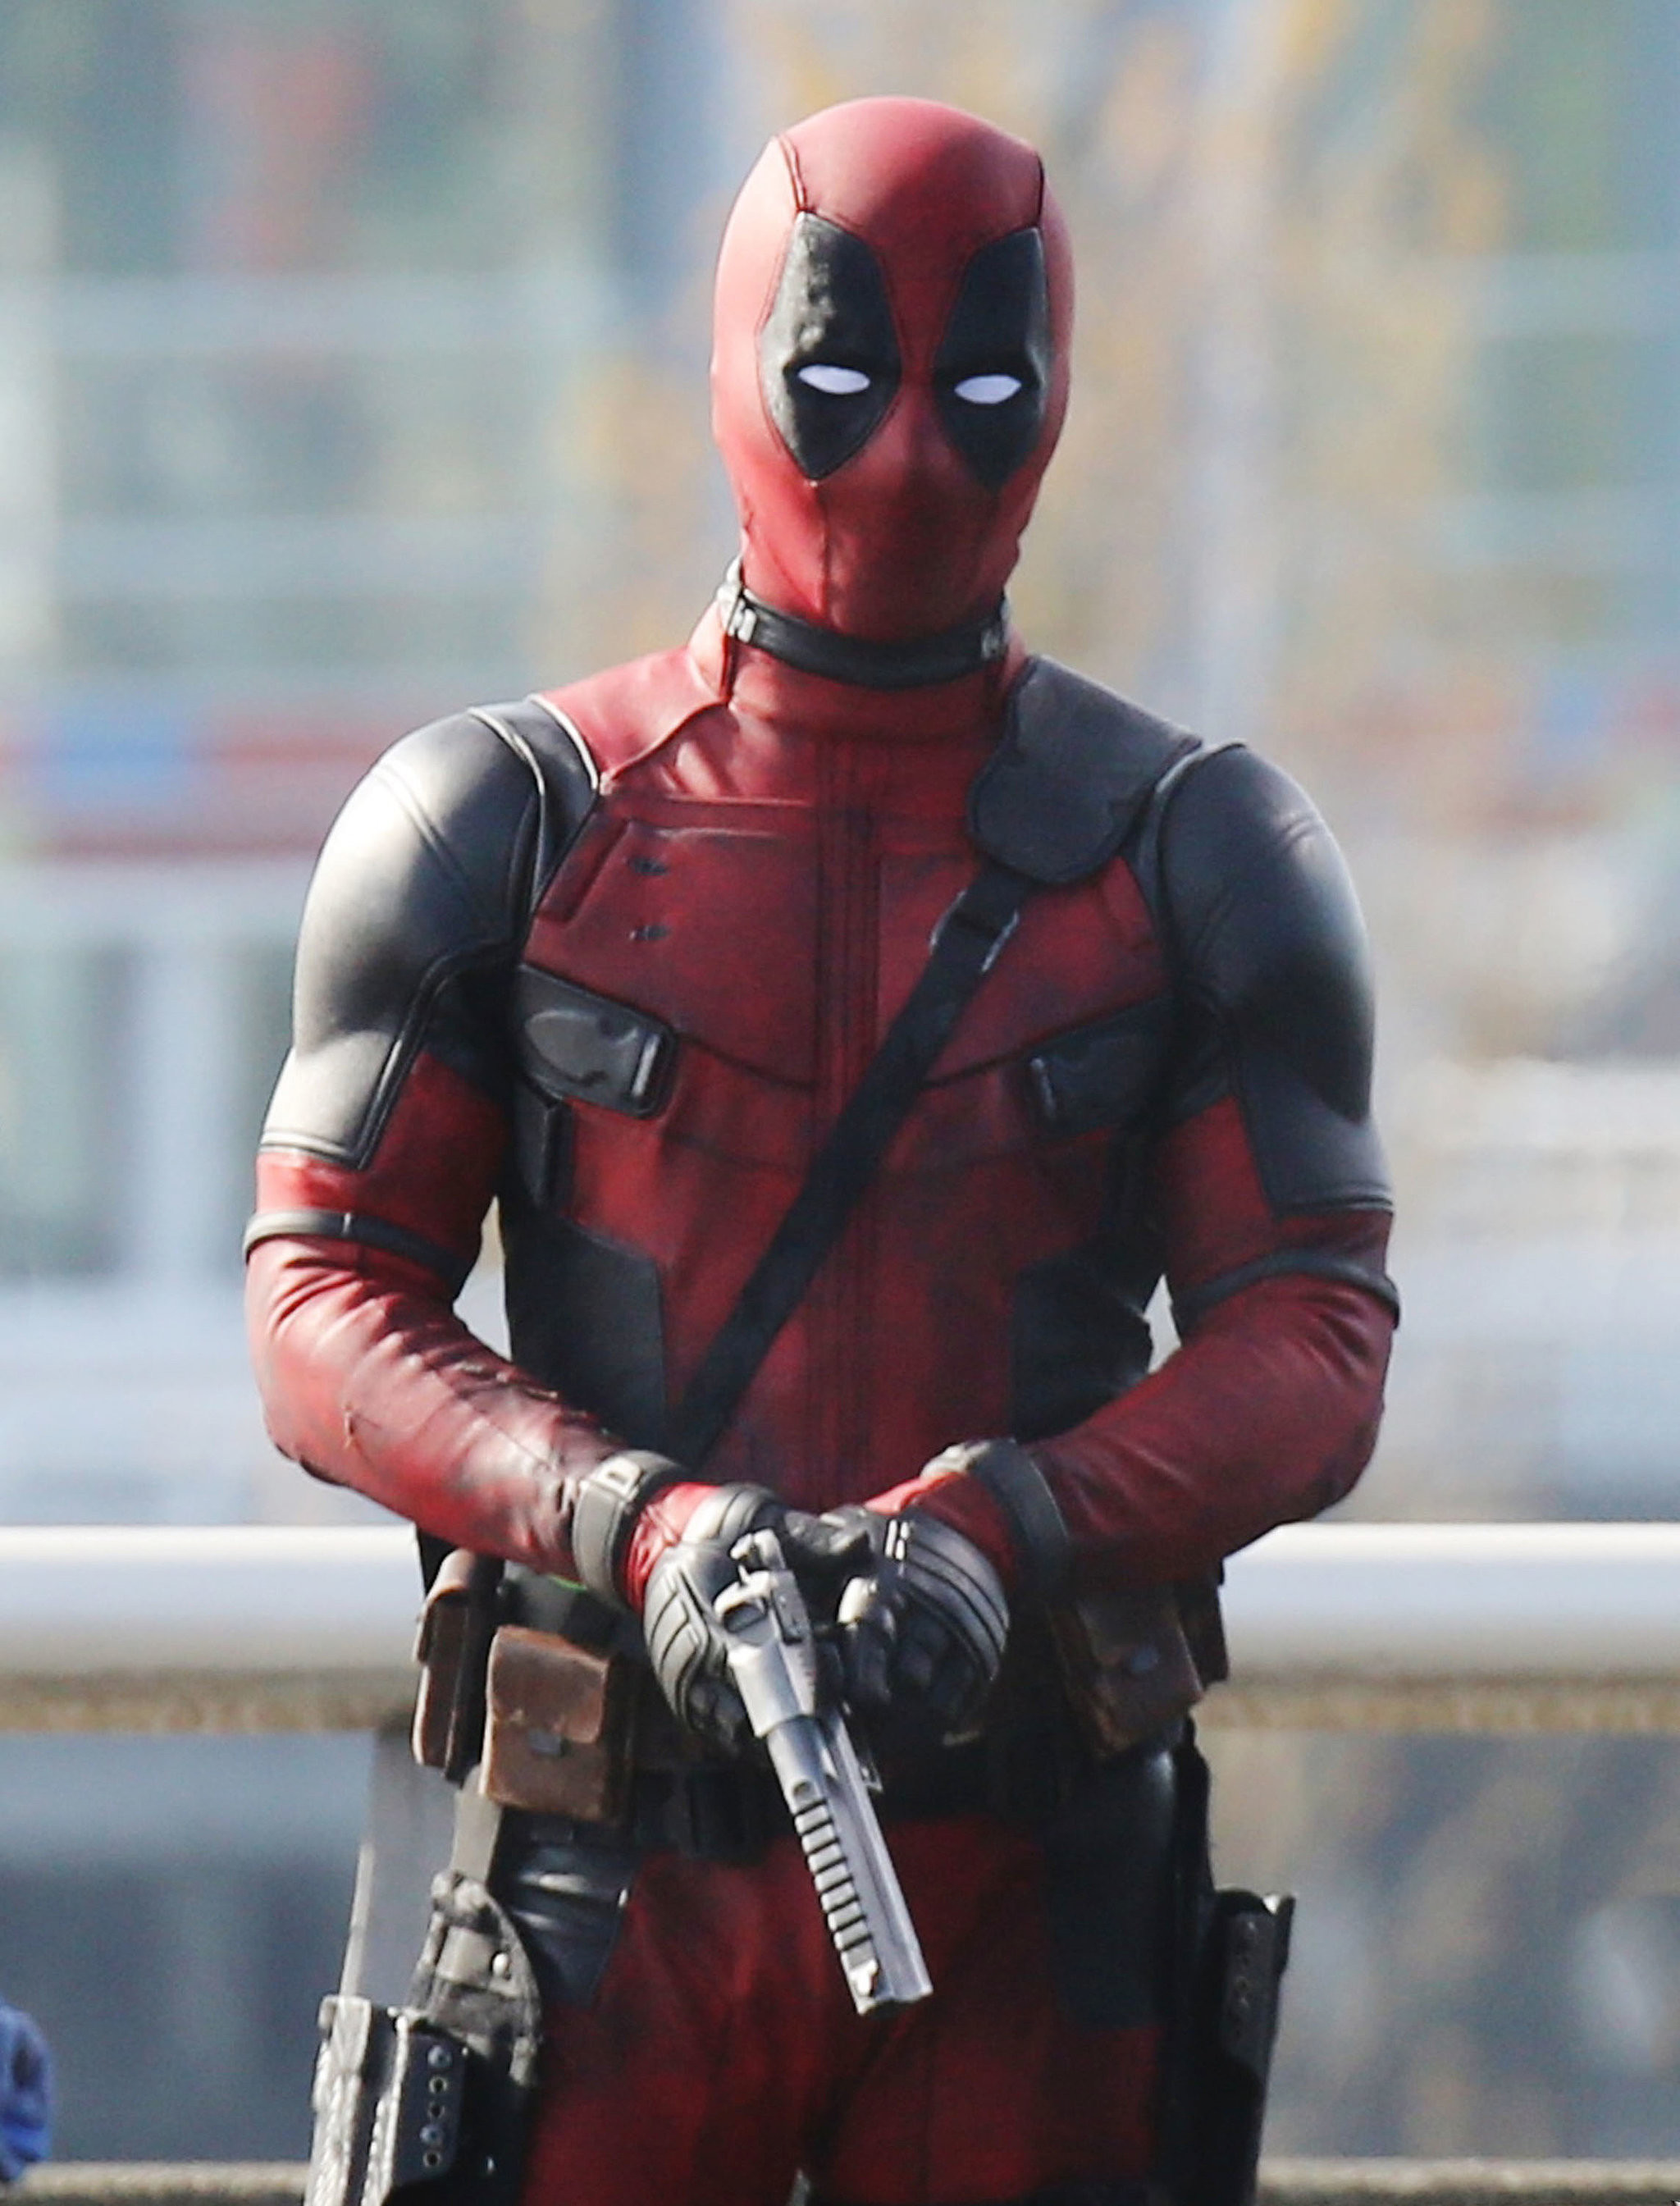 Deadpool Movie High Quality Wallpaper For iPhone Movie Suit